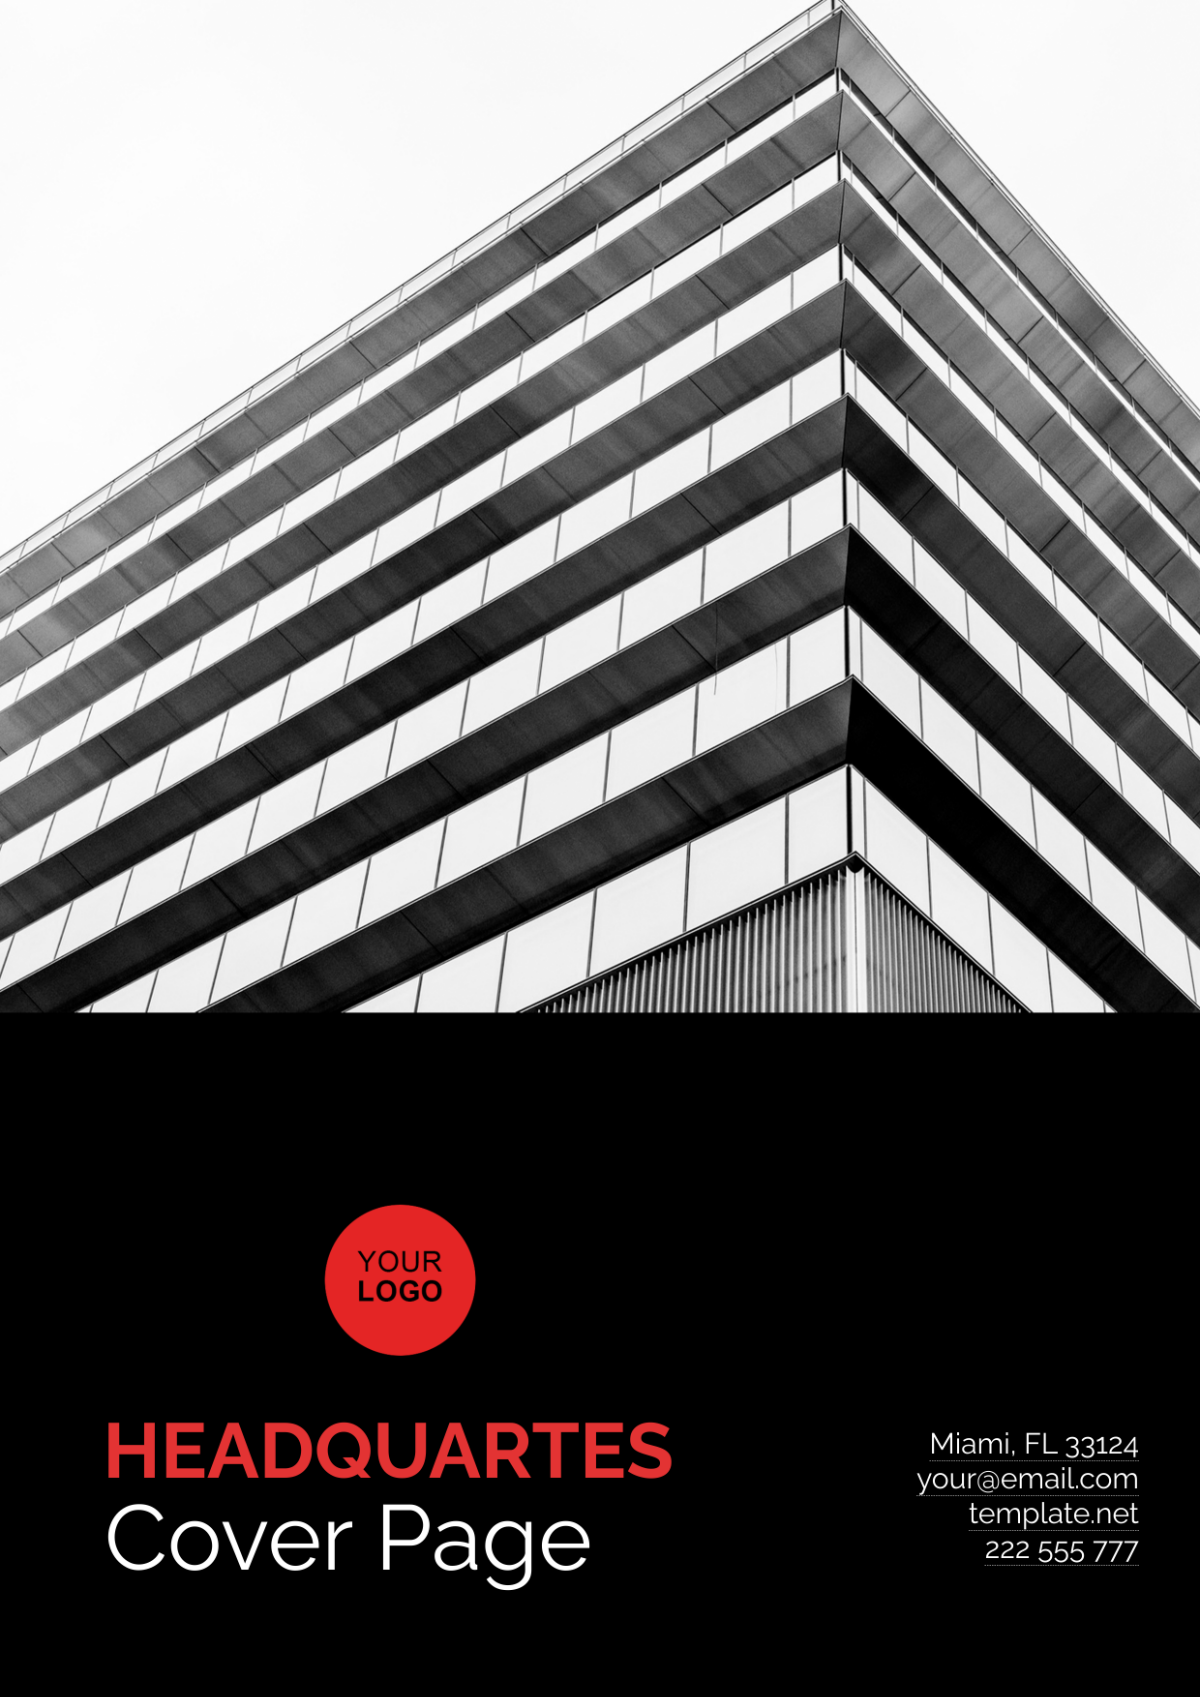 Headquarters Cover Page Address Template